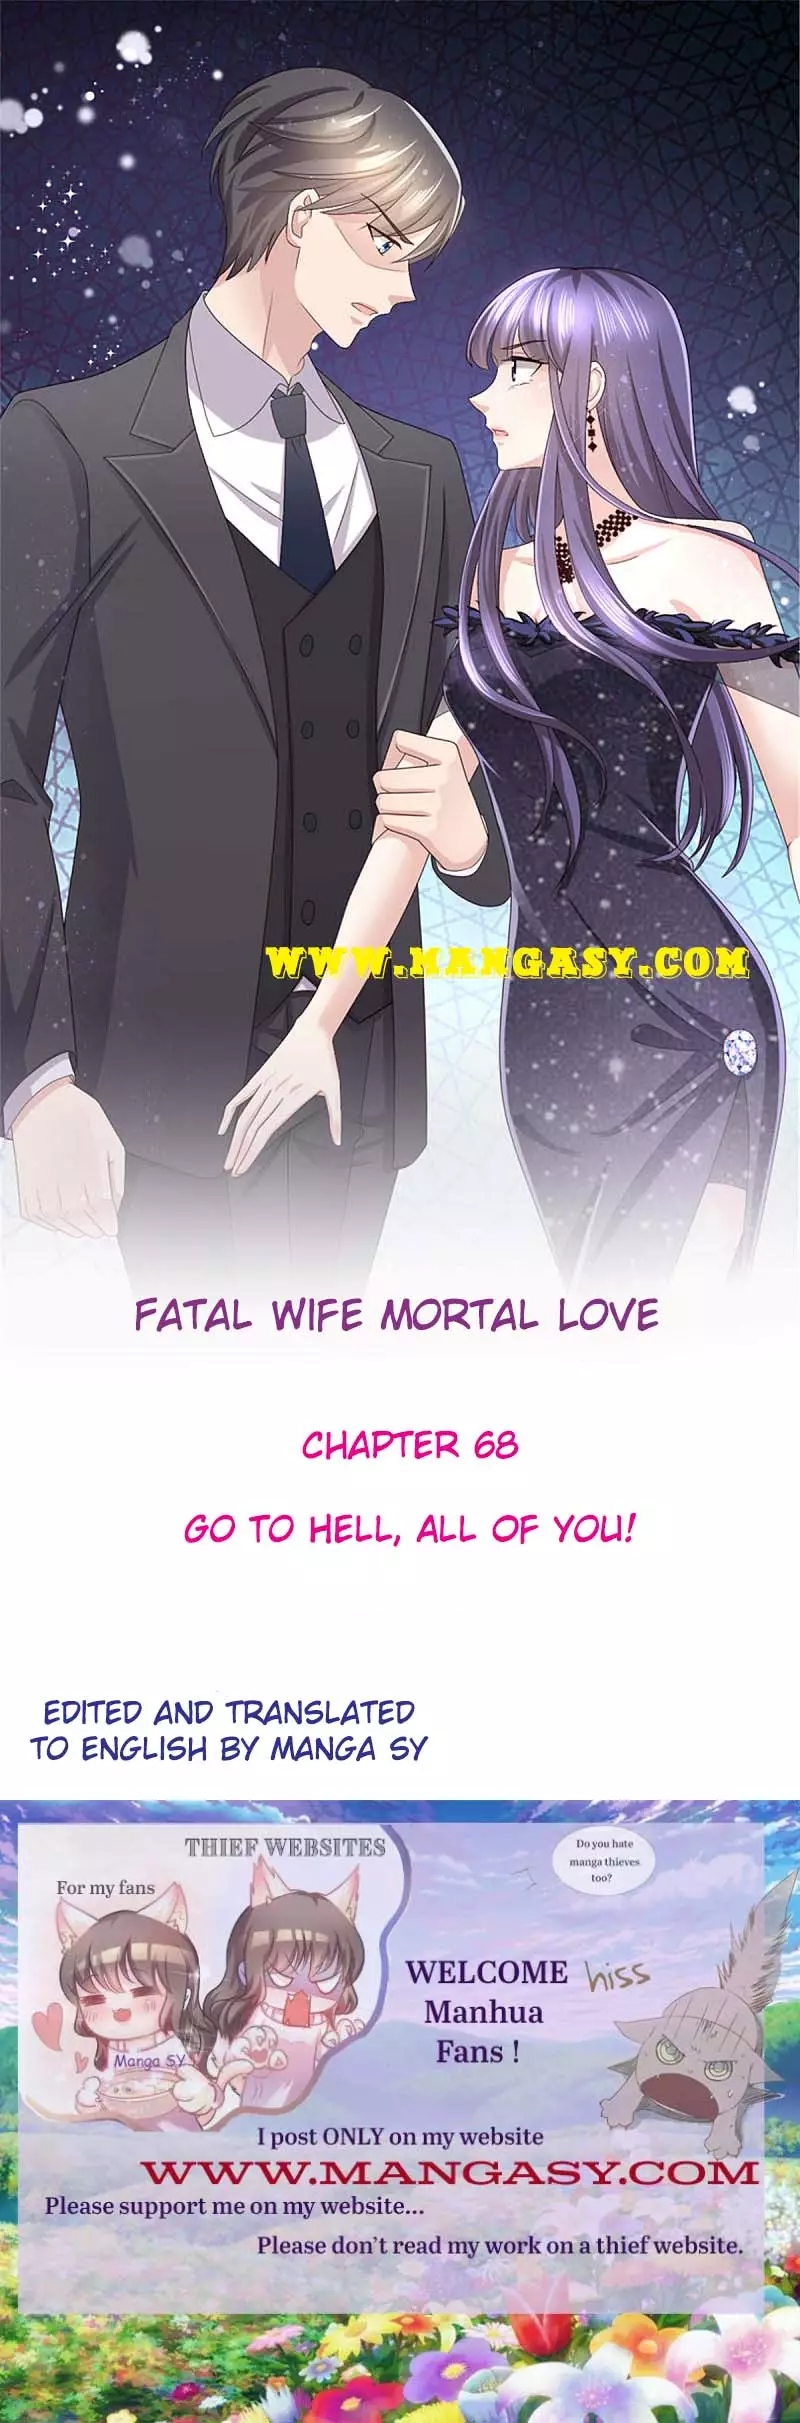 A Deadly Sexy Wife: The Ceo Wants To Remarry - 68 page 1-7ea00d3f